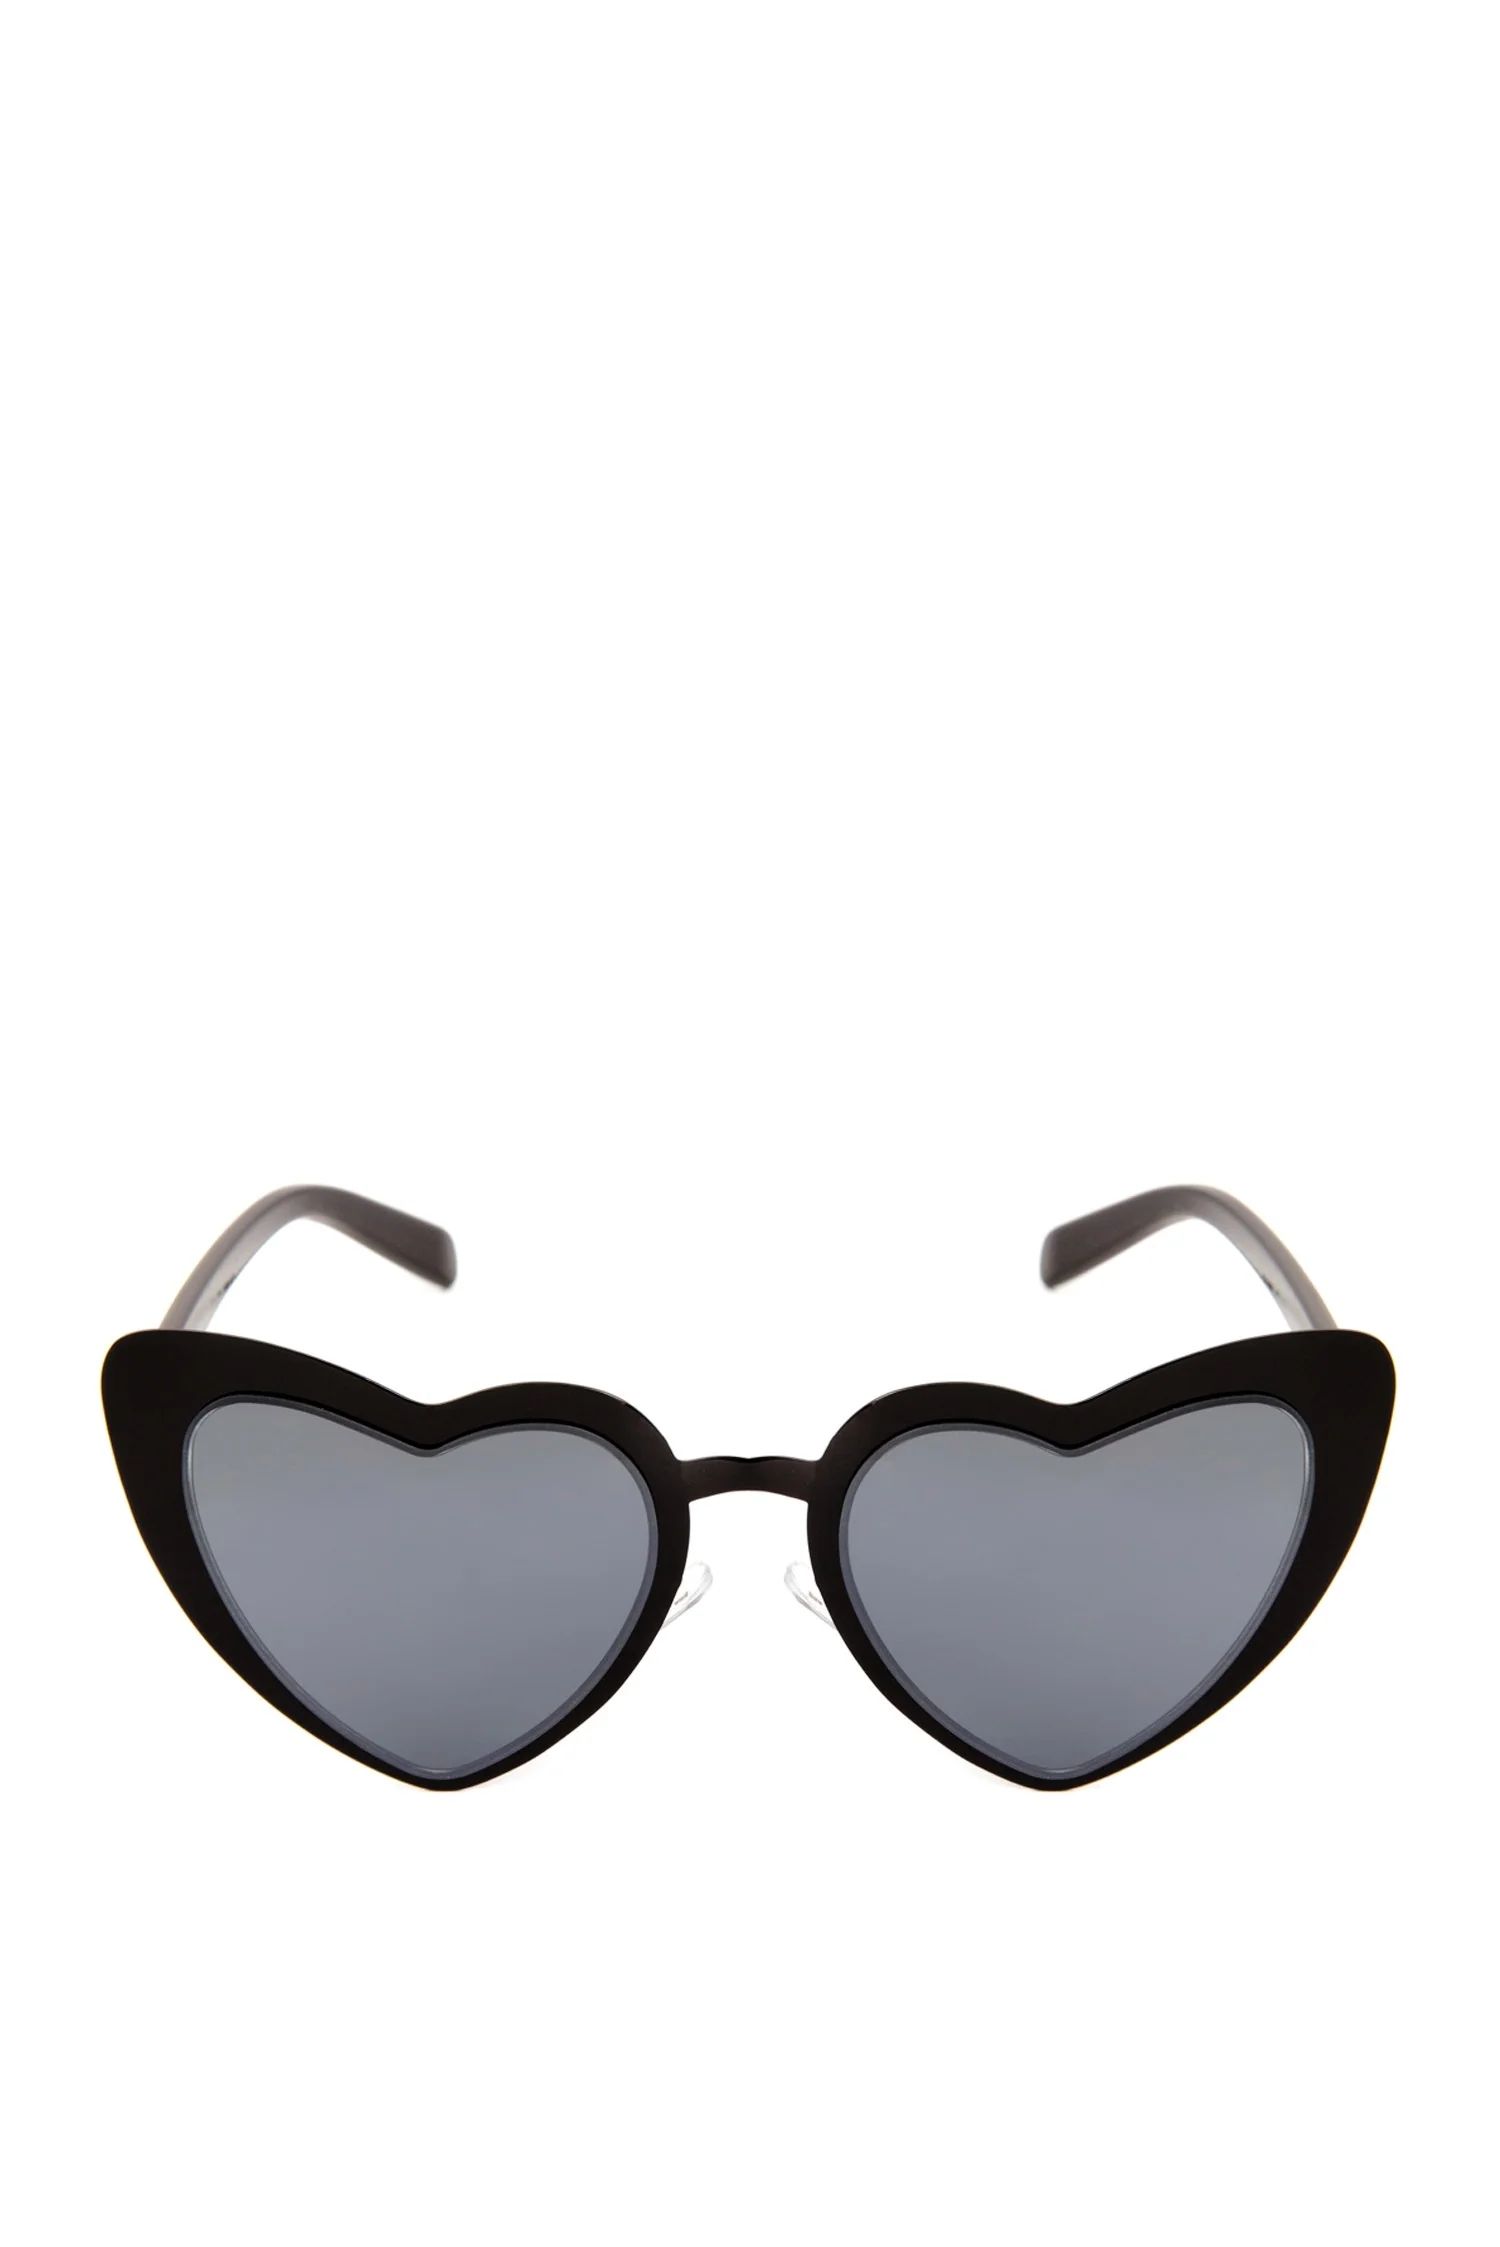 With Love Heart Sunglasses | Windsor Stores